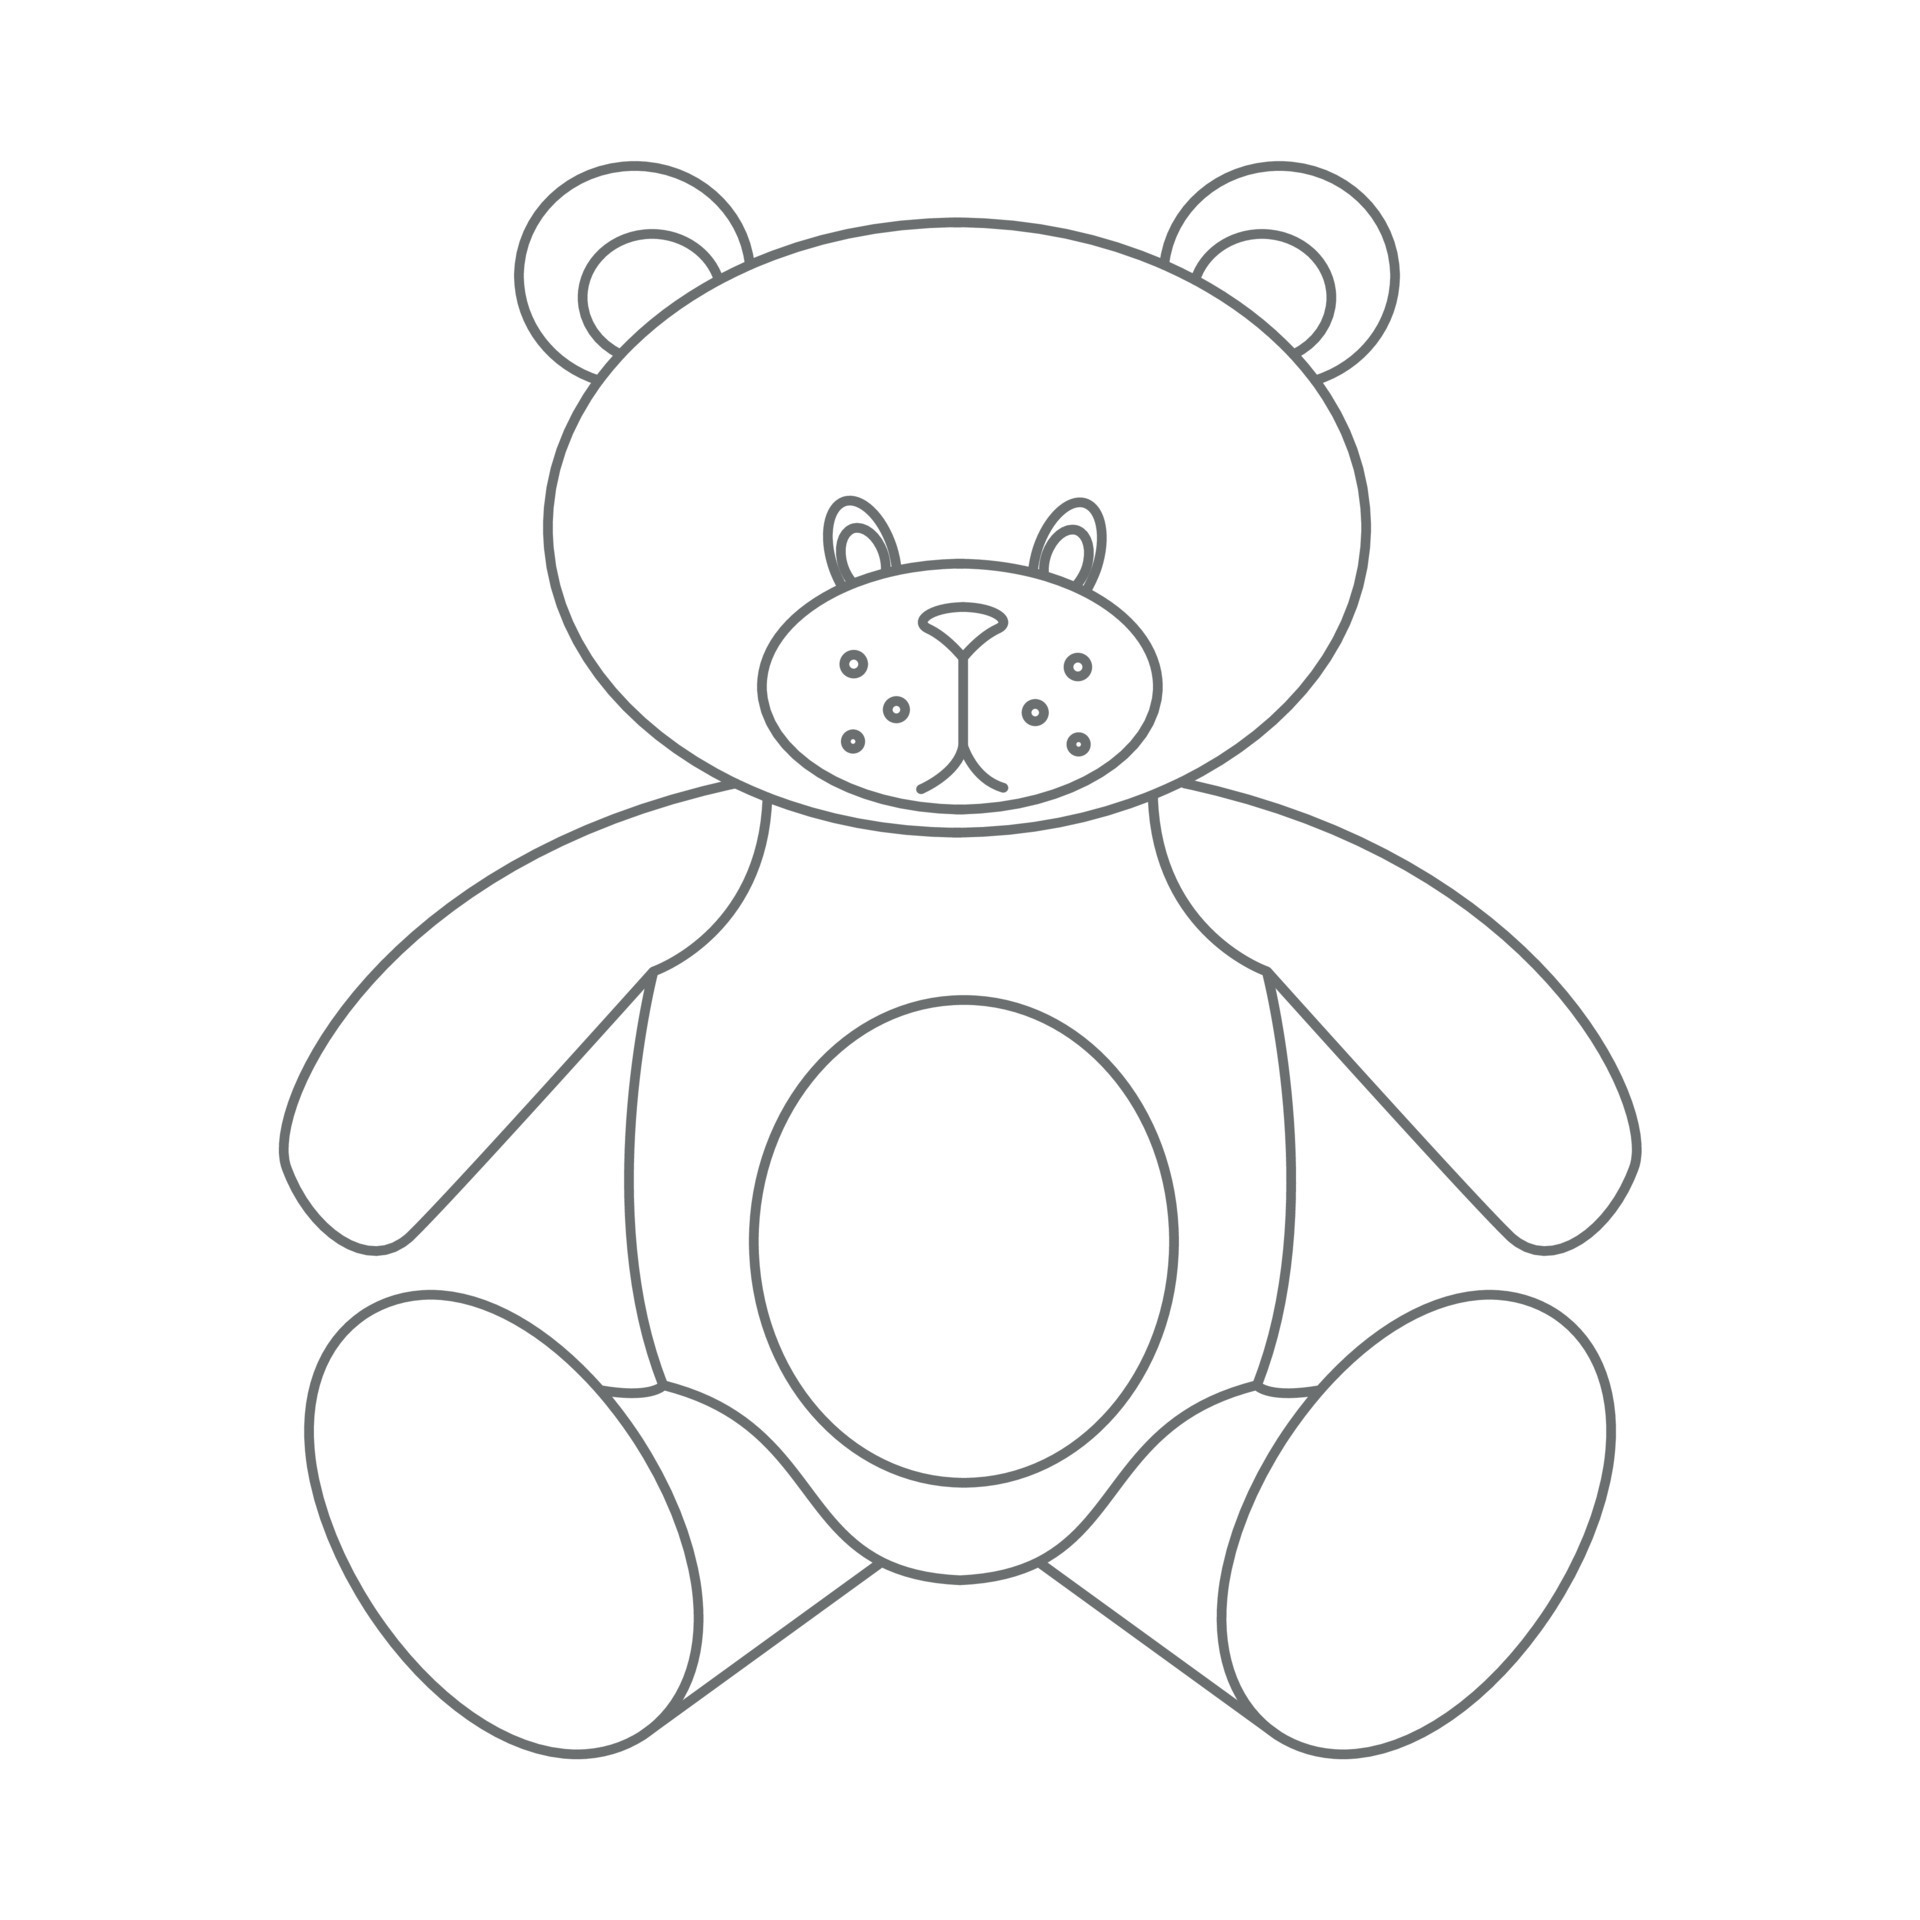 Stuffed Animal Coloring Pages Teddy Bear Drawing By Hand Outline Sketch  Vector, Guidelines Drawing, Guidelines Outline, Guidelines Sketch PNG and  Vector with Transparent Background for Free Download